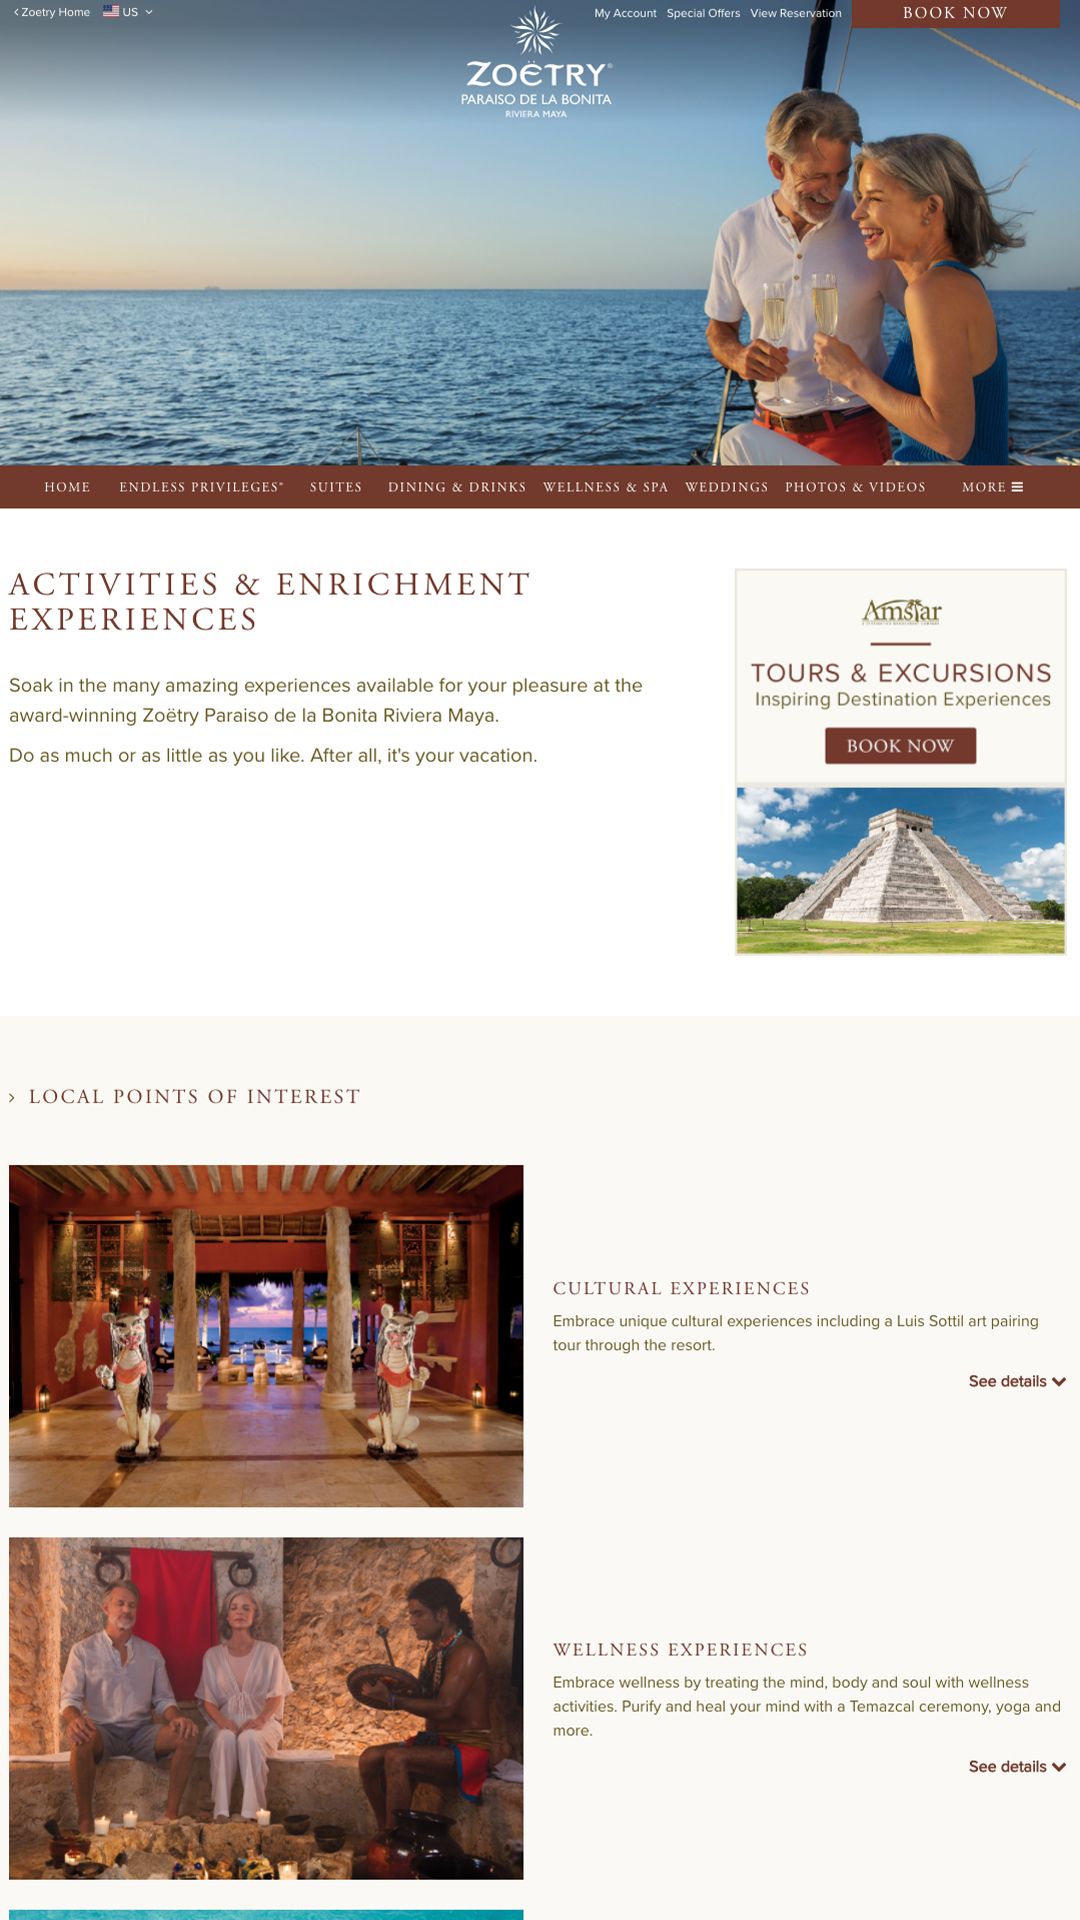 Zoetry Resorts activities and excursions webpage